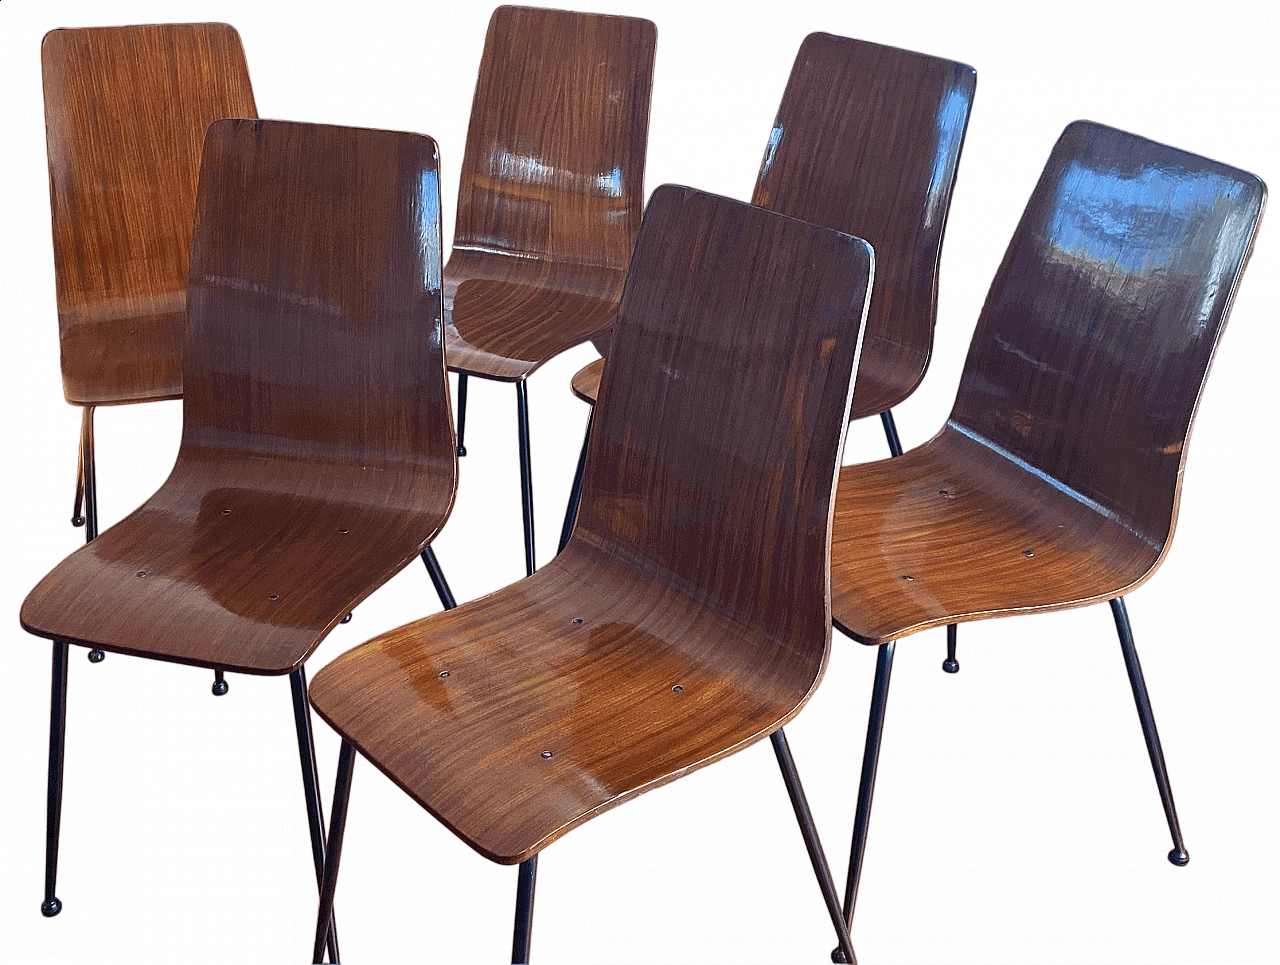 6 Bentwood chairs with lacquered metal frame by Carlo Ratti, 1950s 5